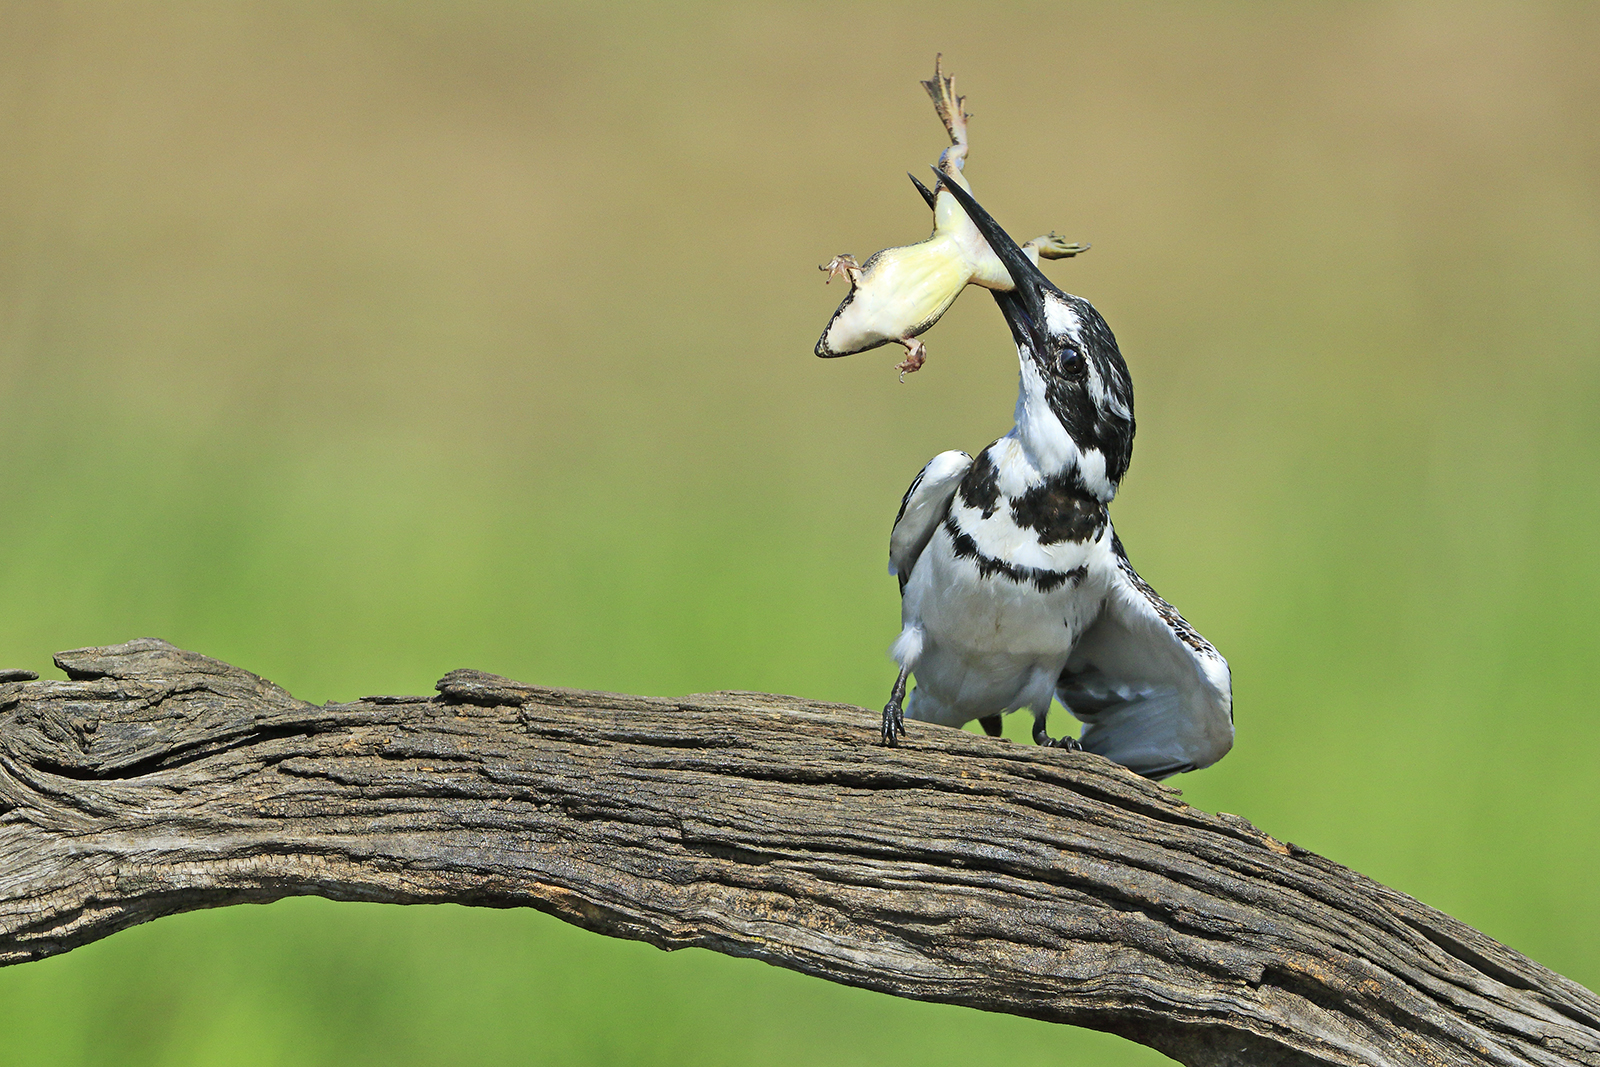 PIED KINGFISHER LIFTS FROG